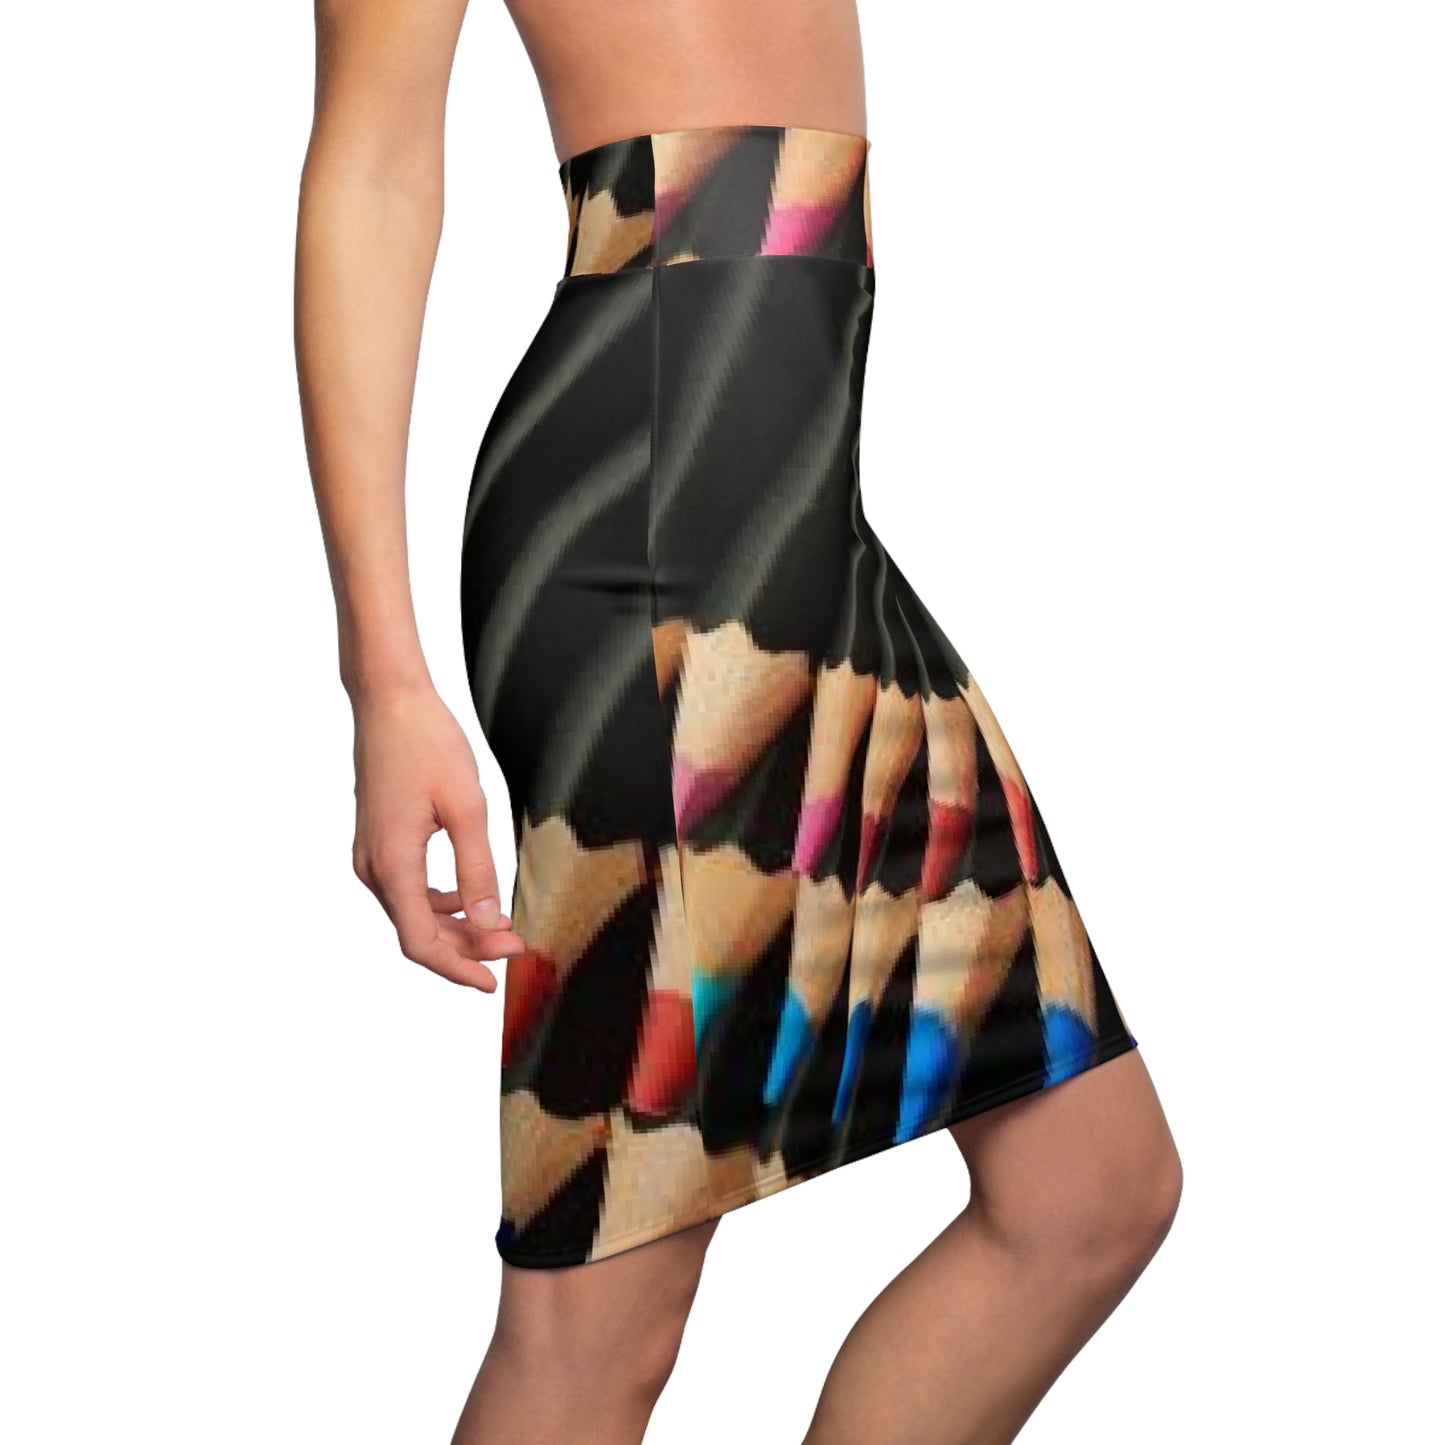 The B.E. Style Brand Colored Pencil Skirt